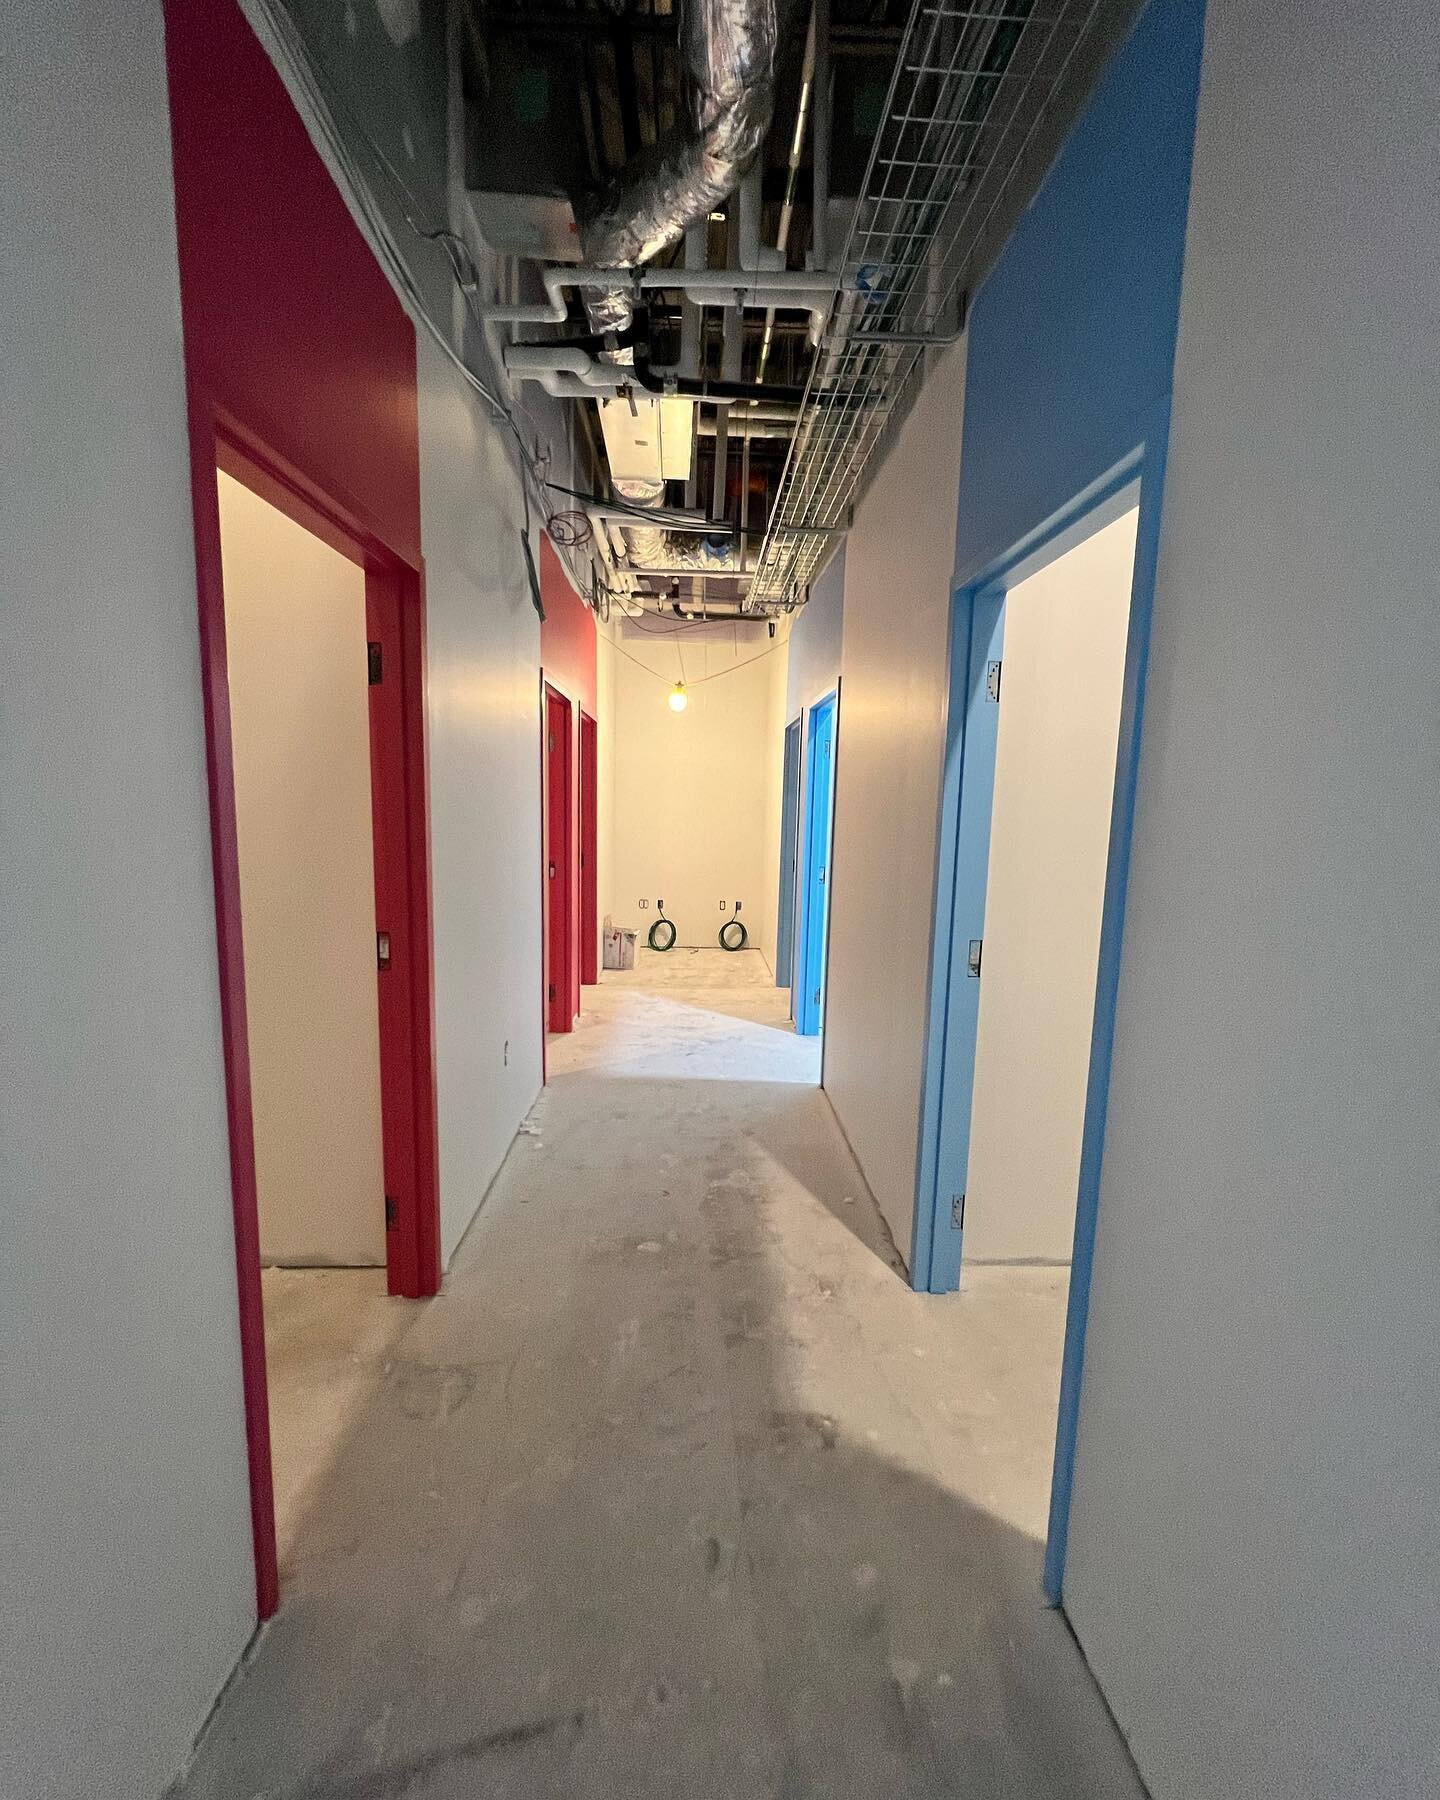 Prime paint and first accent coats are going up and this new medical space is beginning to gain some character! #camfredconstruction #buildforourfutures #medicalbuildout